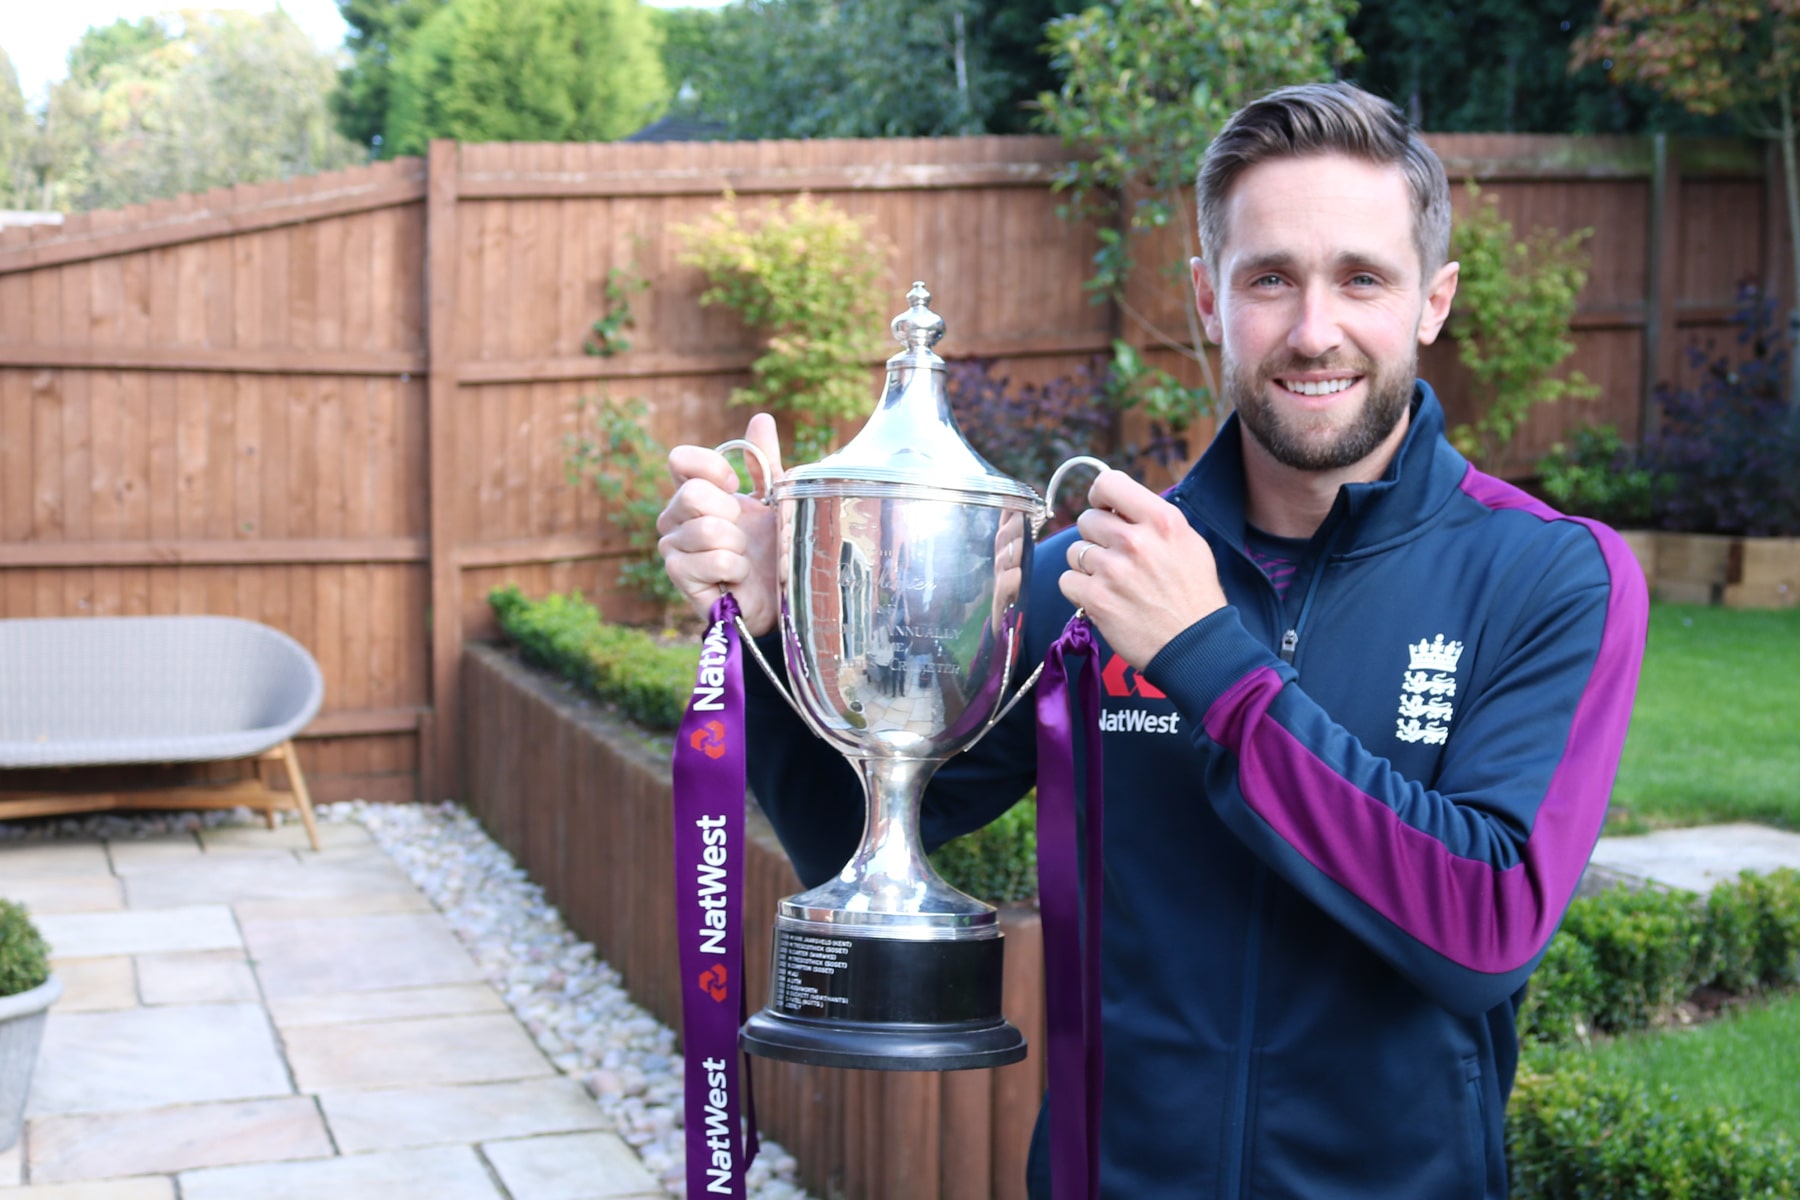 Recognition “an honour and a privilege” – Woakes